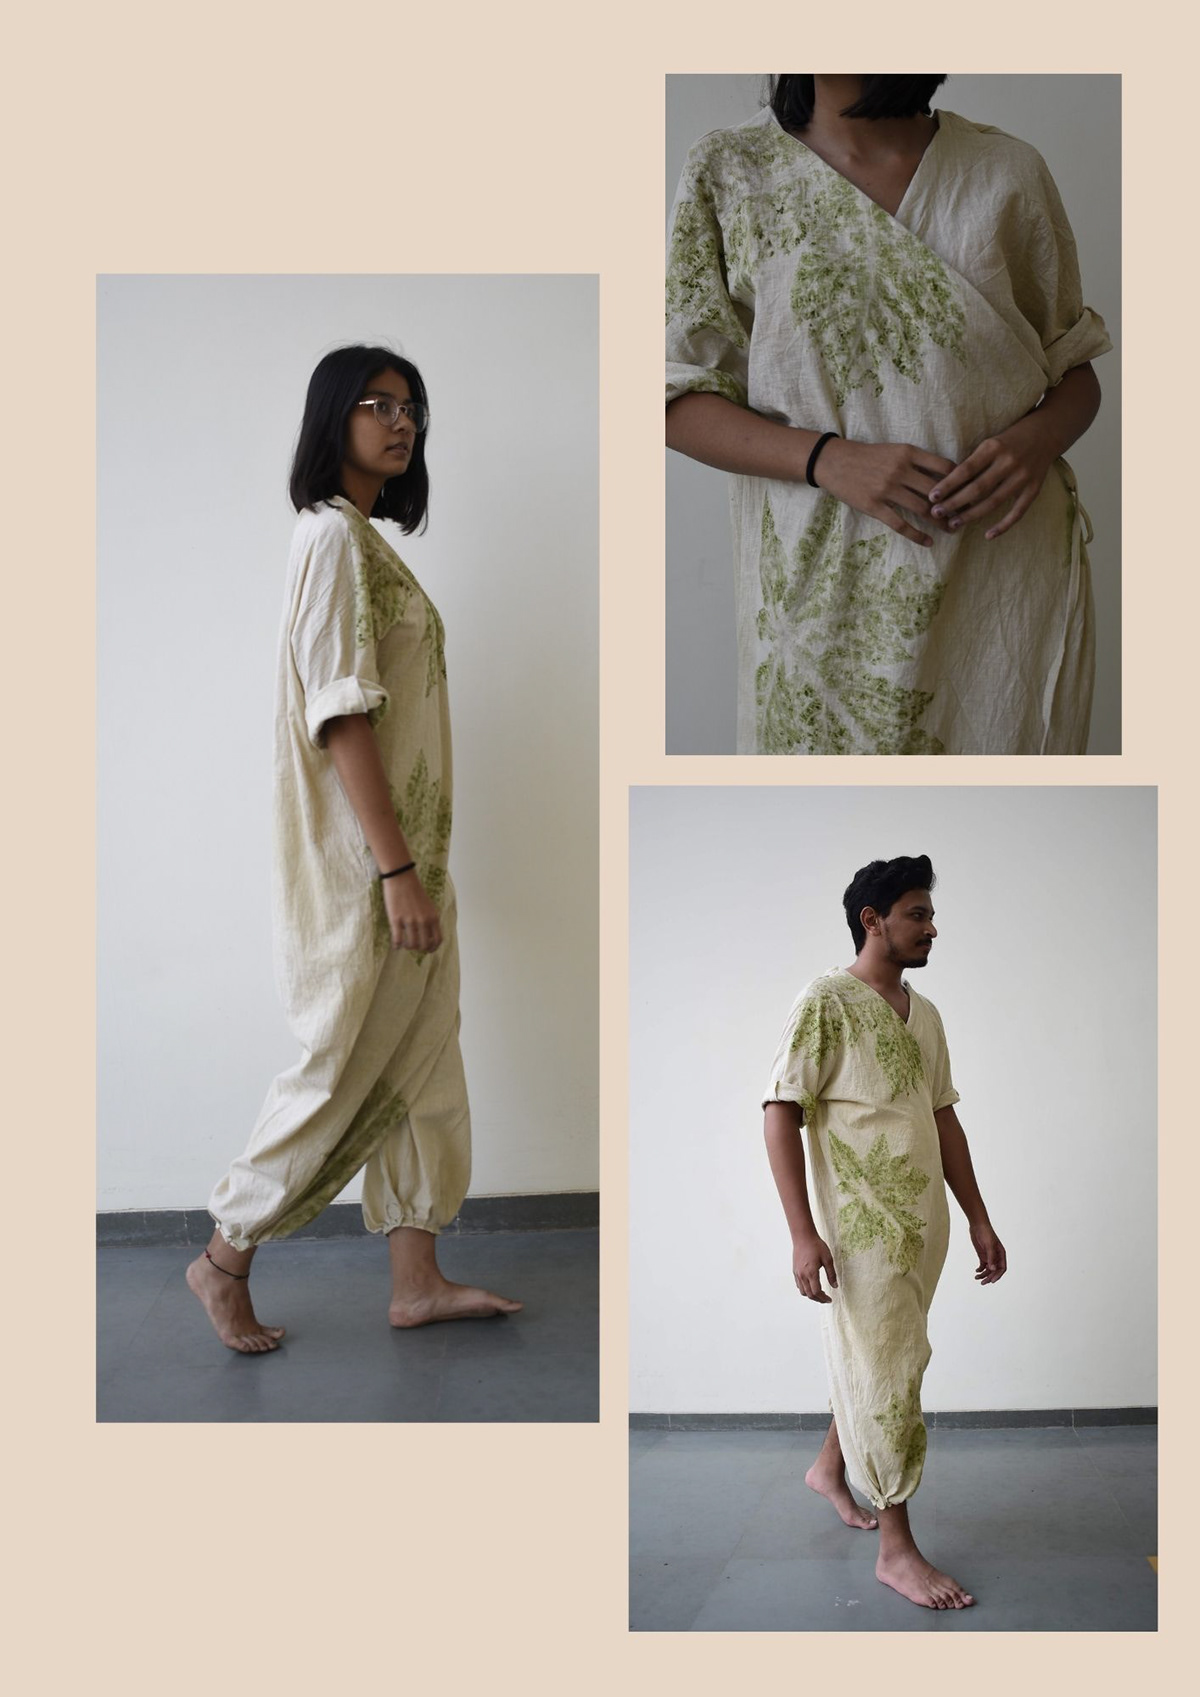 Casual wear eco printing Natural Dyeing Natural fiber Nature organic streetwear Sustainable unisex fashion